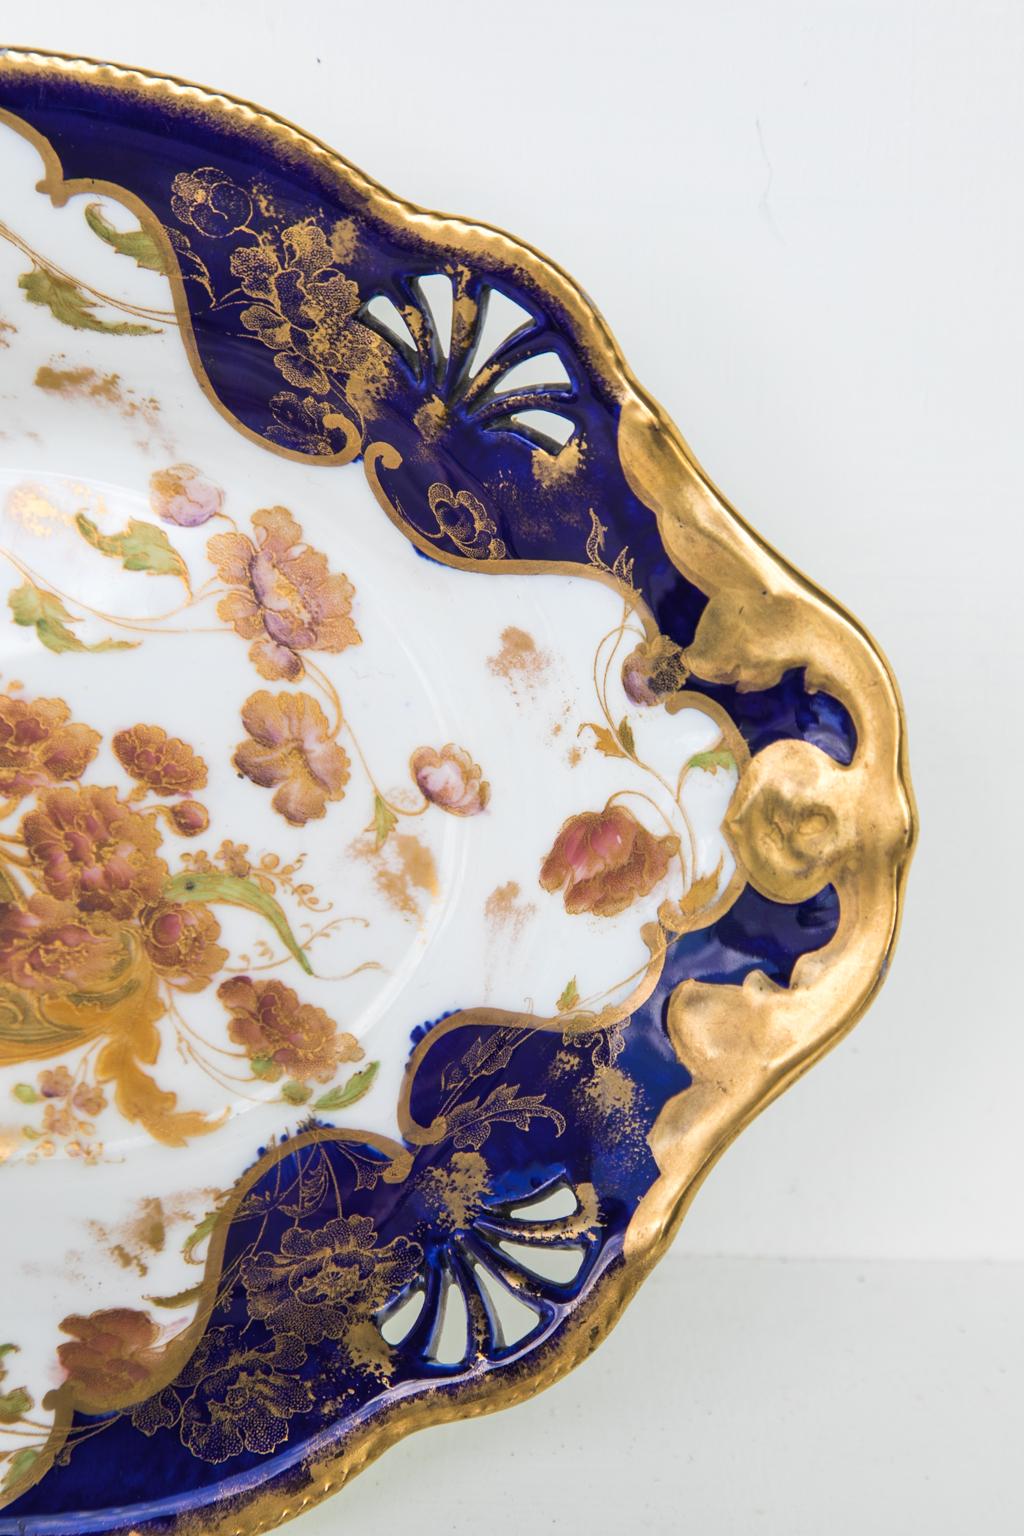 English porcelain dish, with reticulated bands and gilt floral work in the cobalt rim. The center is decorated with floral and arabesque motifs.
        